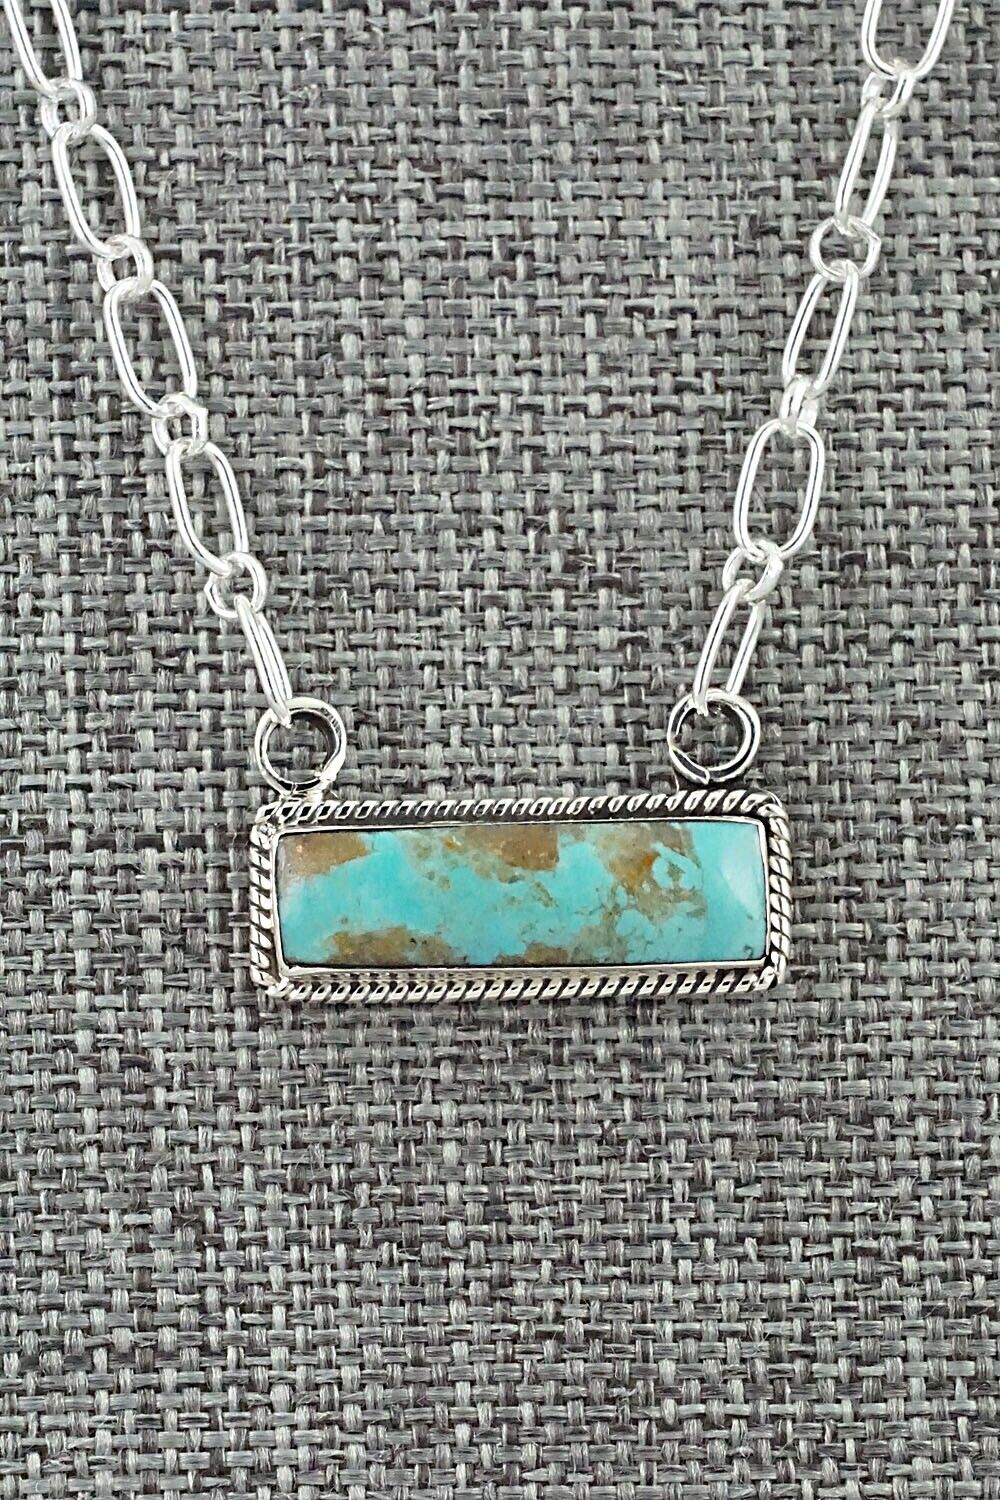 Turquoise & Sterling Silver Necklace - Arlene Lewis